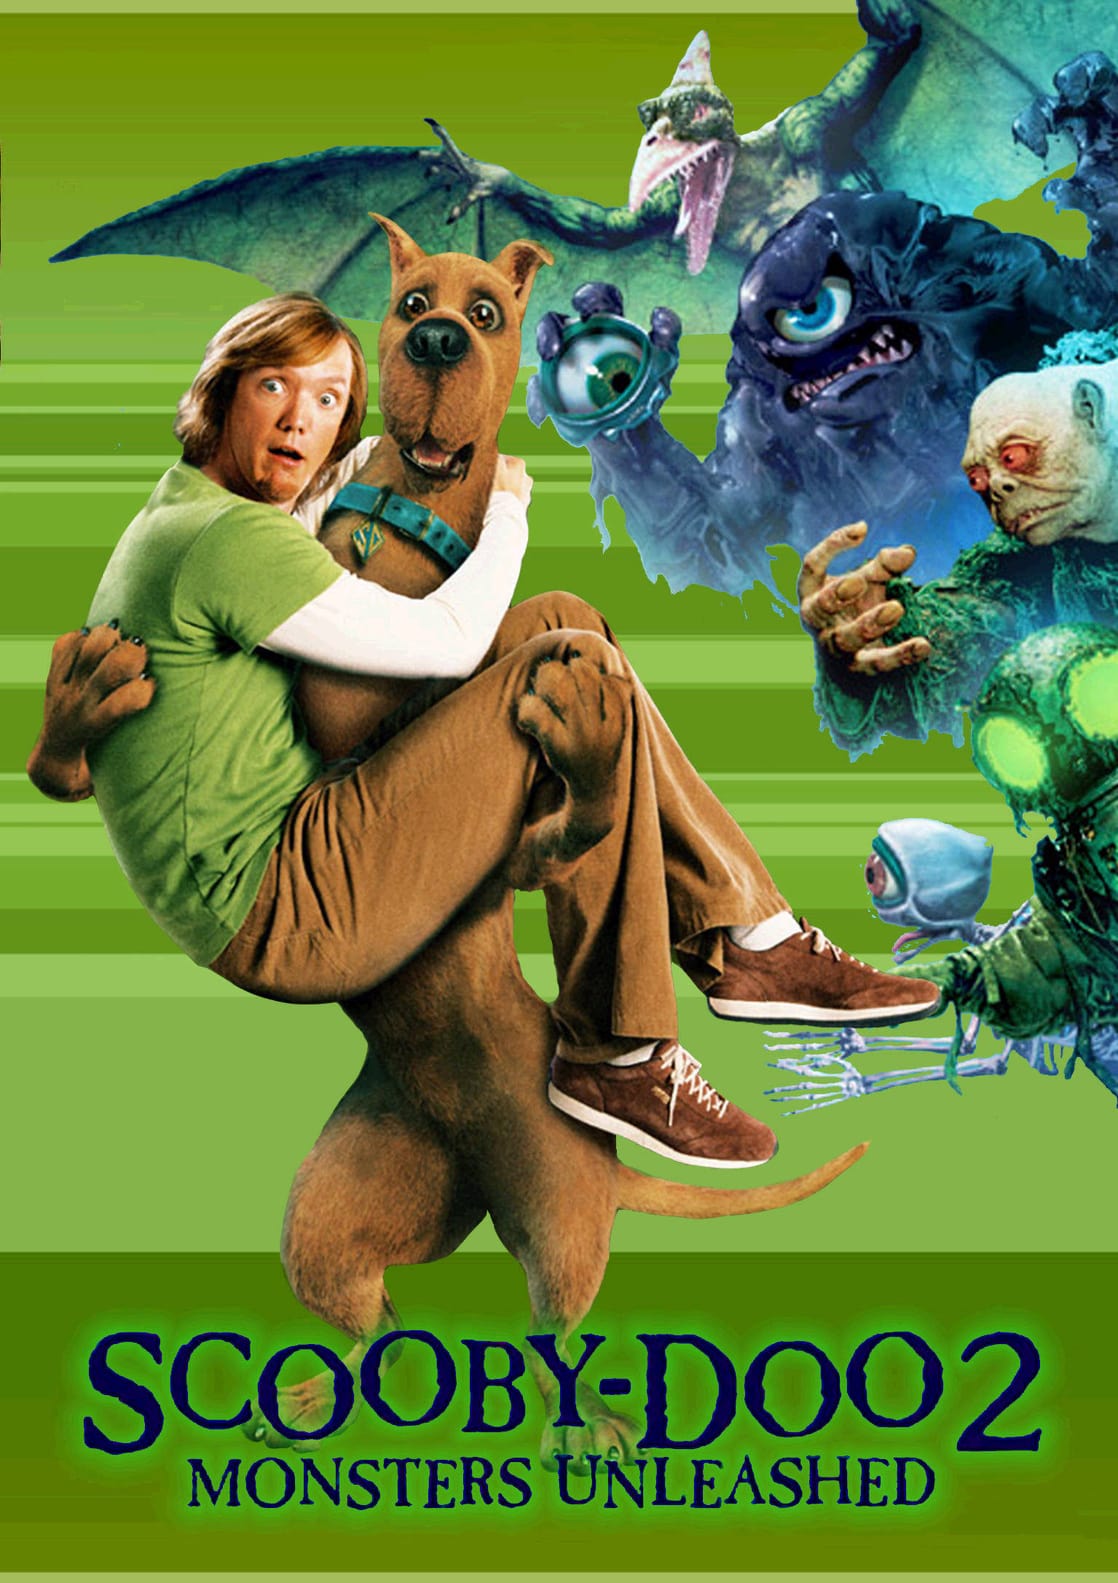 scooby doo 2 monsters unleashed songs